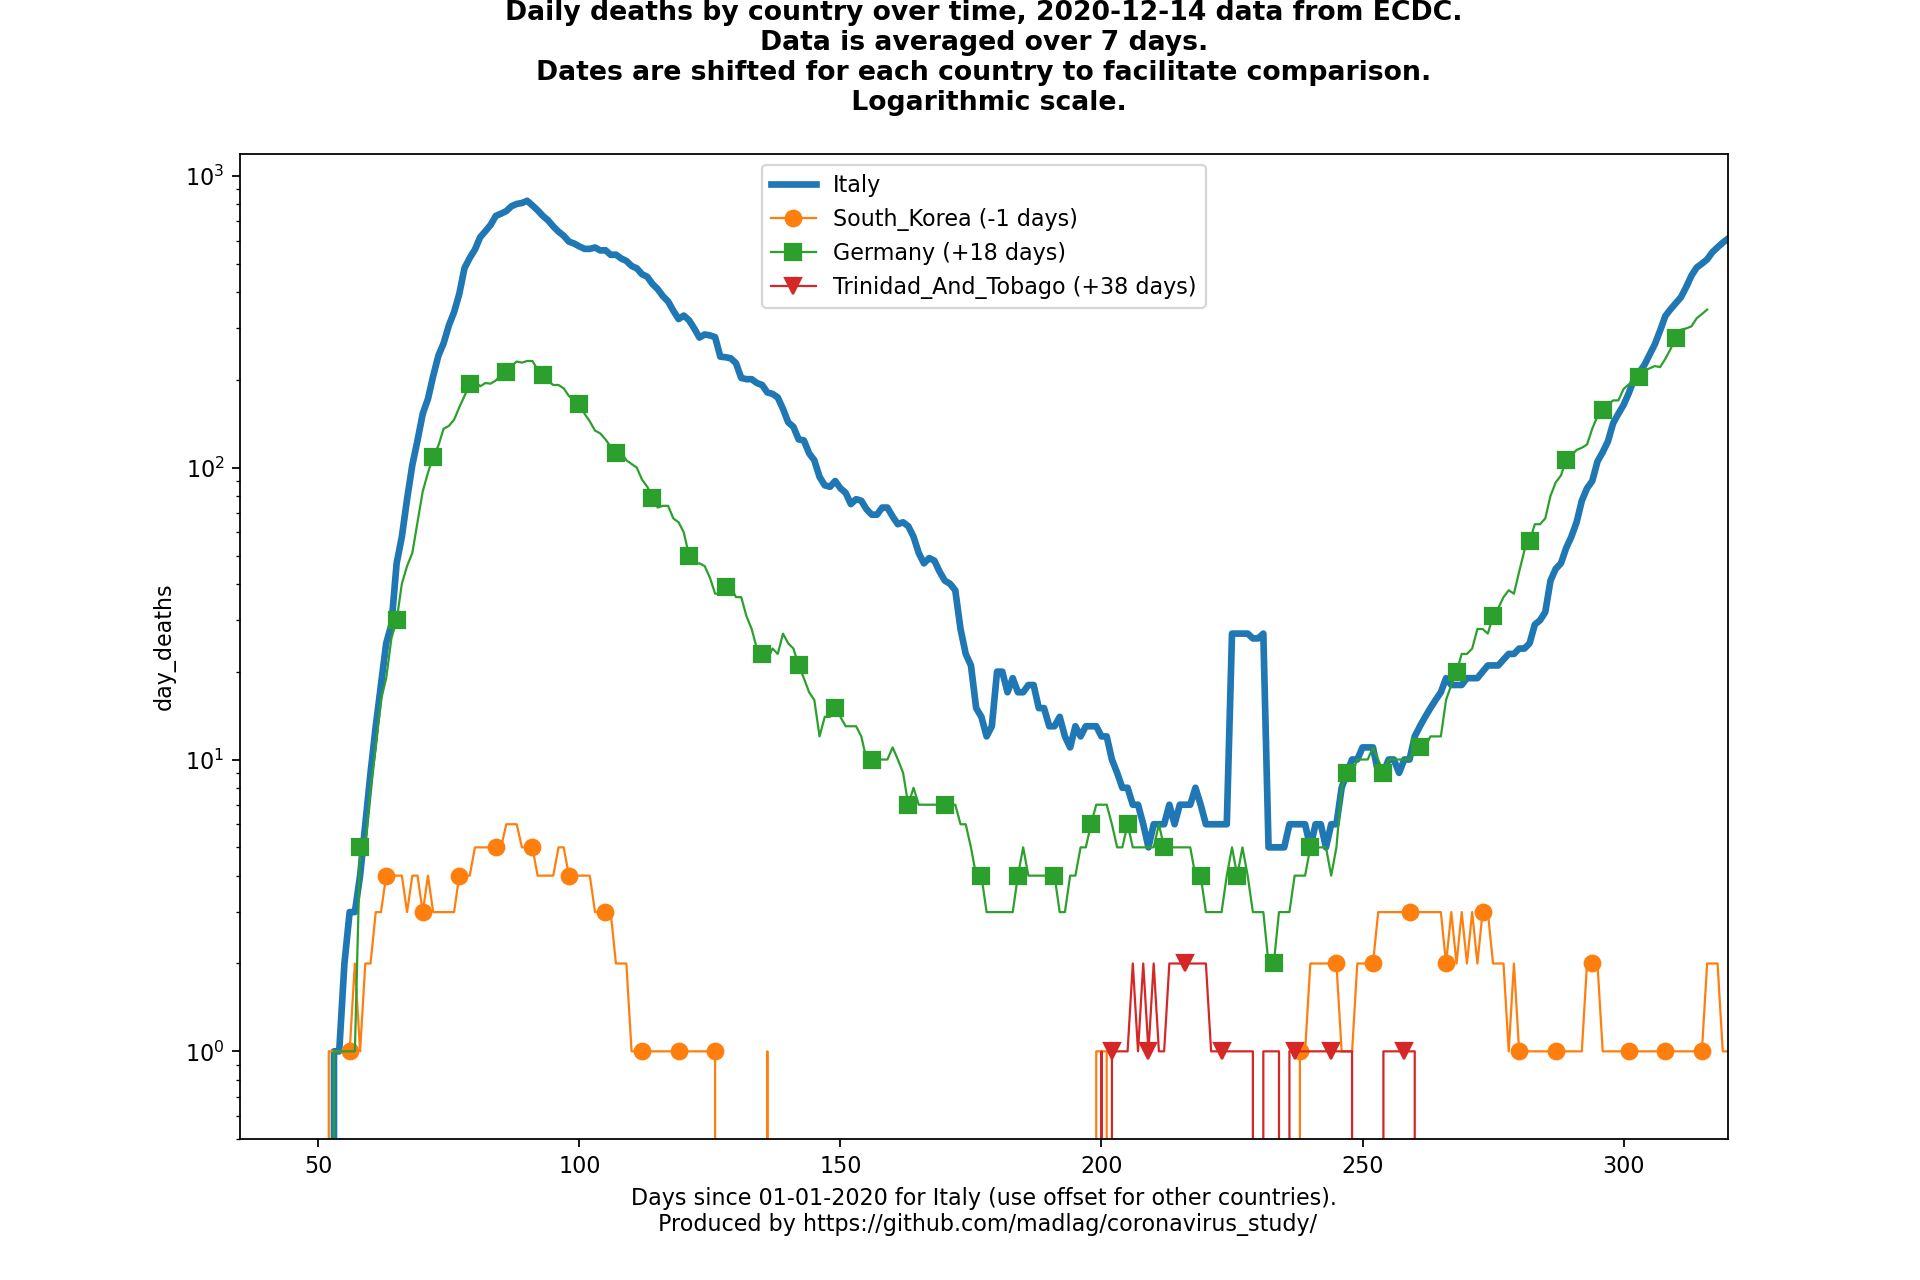 Trinidad And Tobago covid-19 daily deaths animated chart